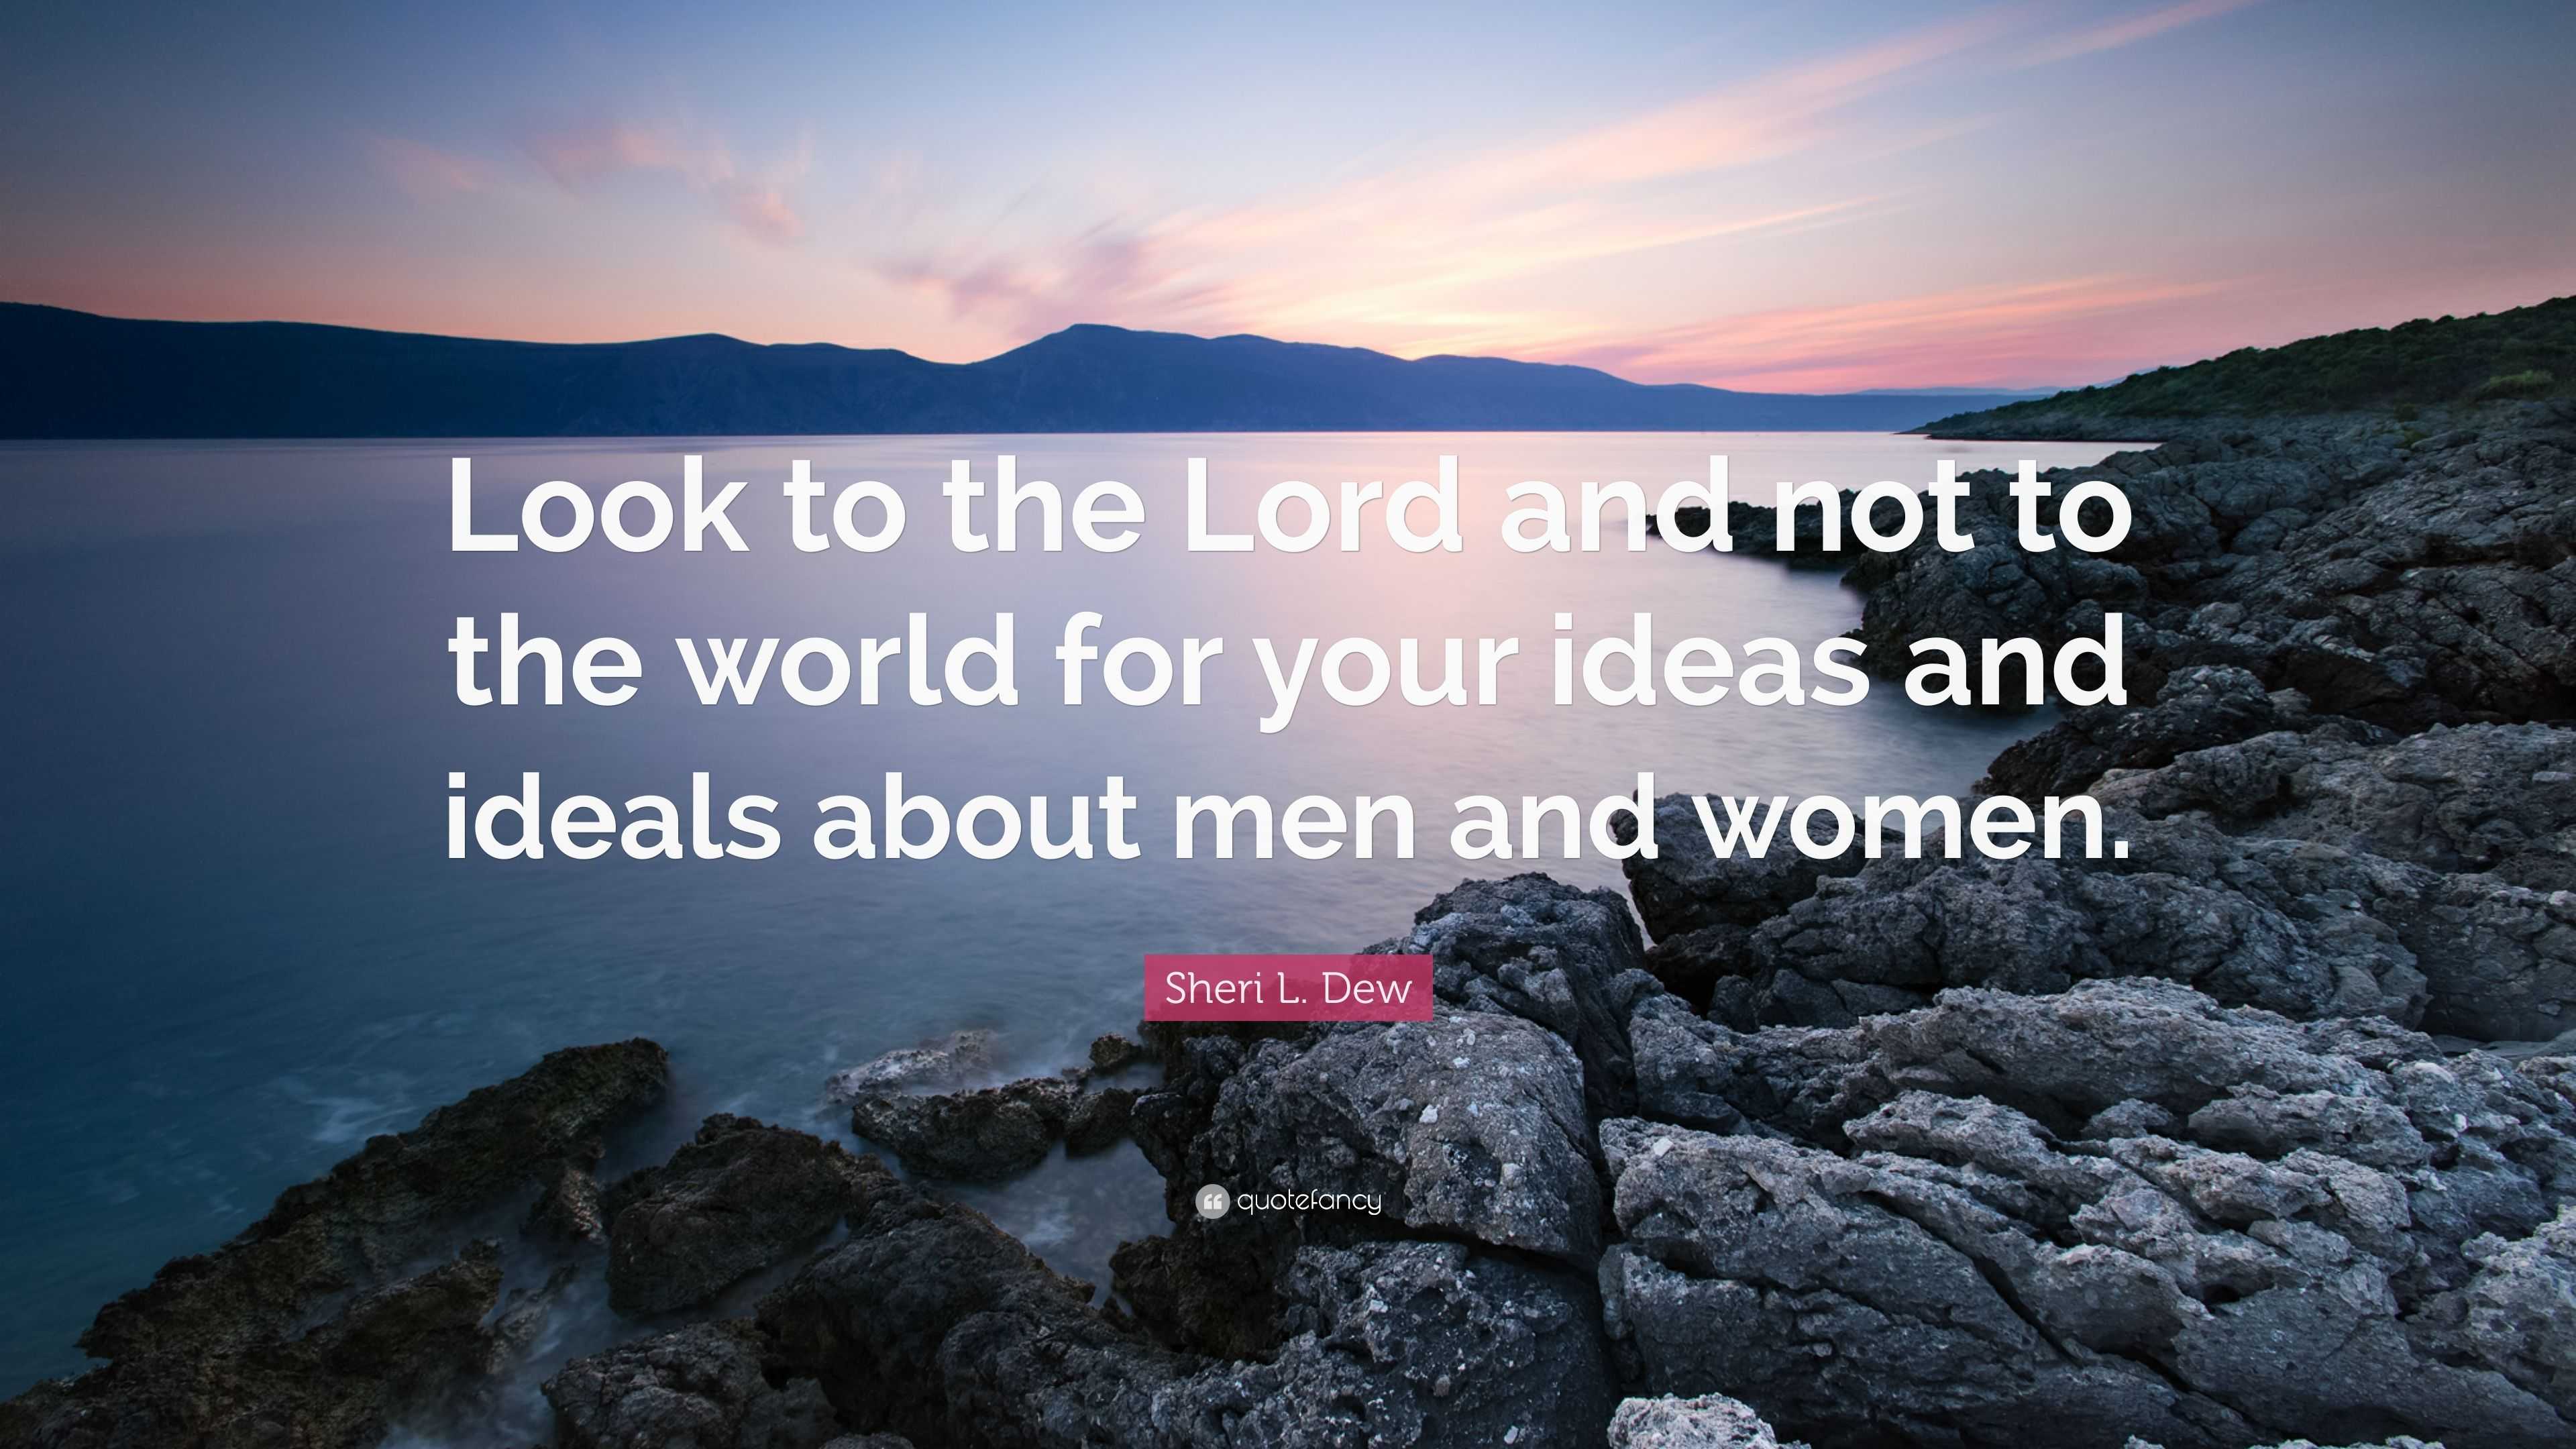 Sheri L. Dew Quote: “Look to the Lord and not to the world for your